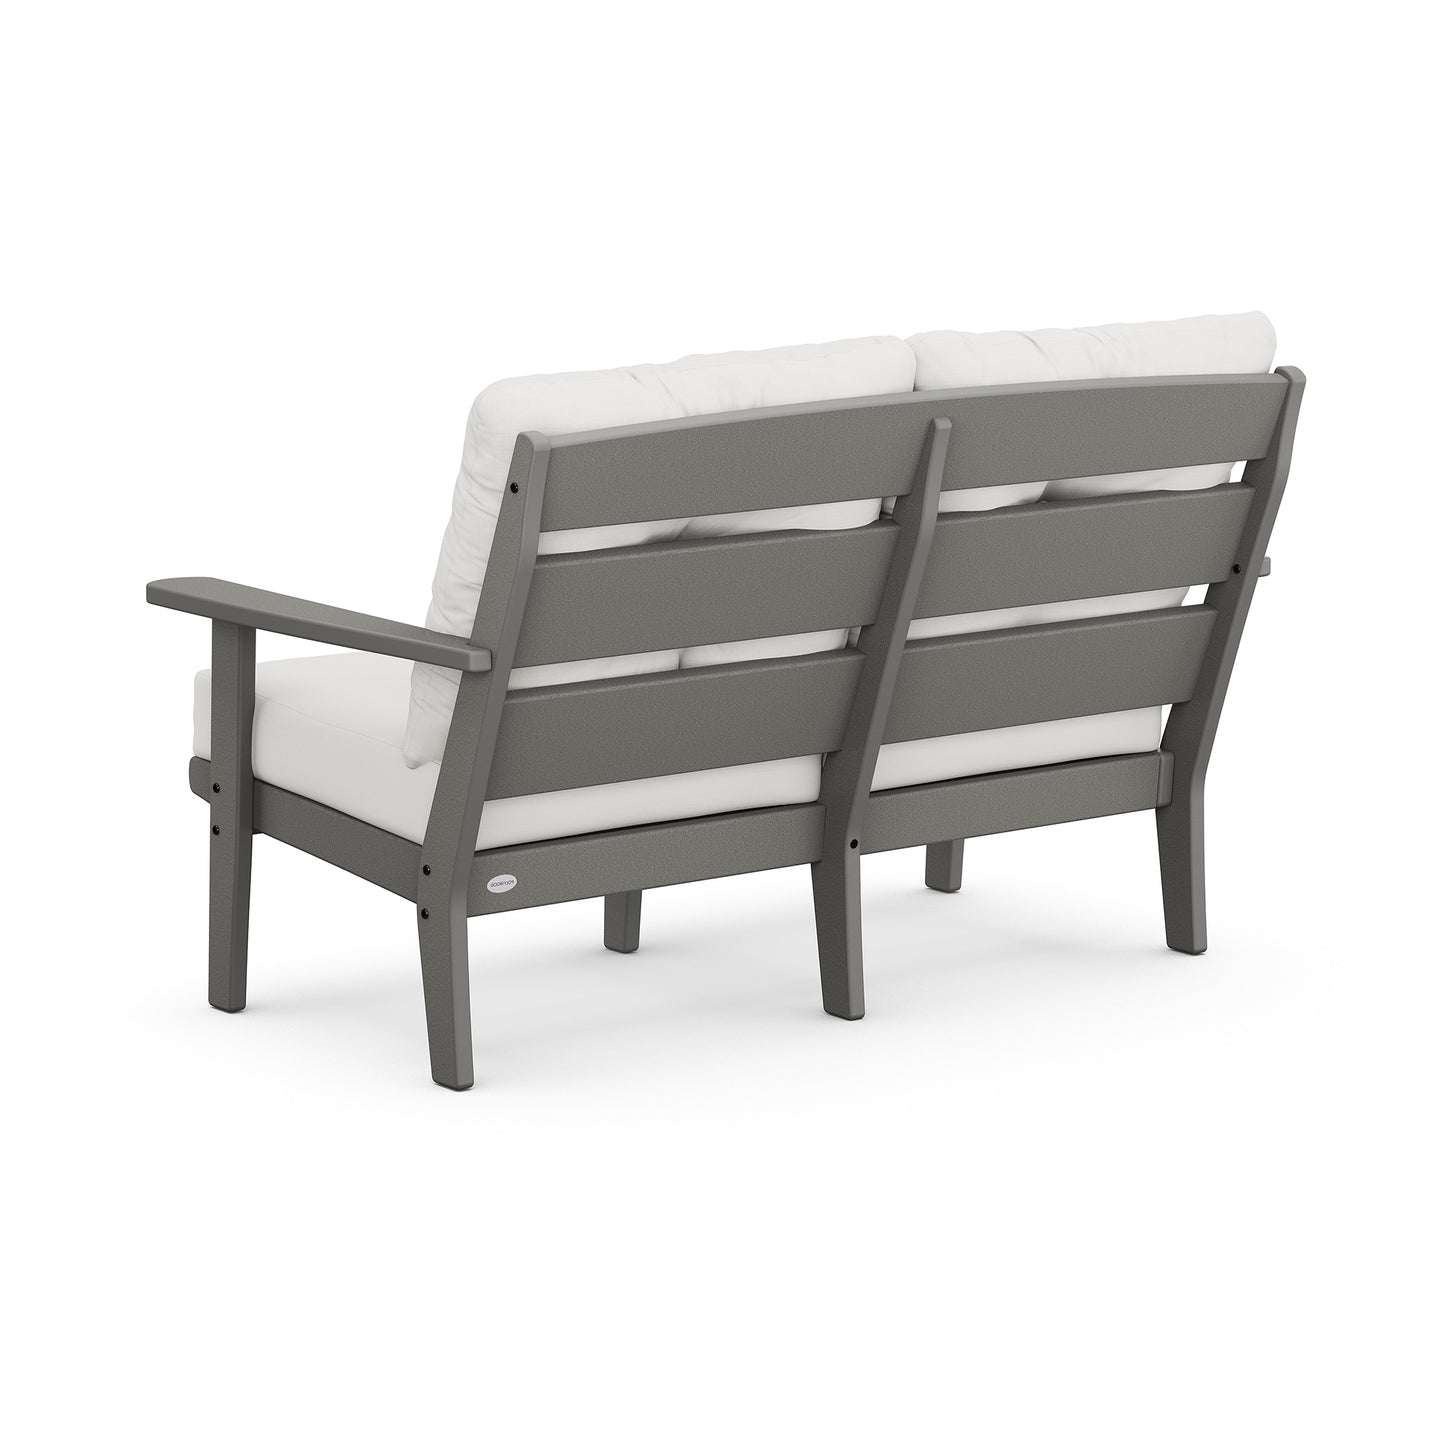 A modern POLYWOOD® Lakeside Deep Seating Loveseat with a gray aluminum frame and white cushions, isolated on a white background.